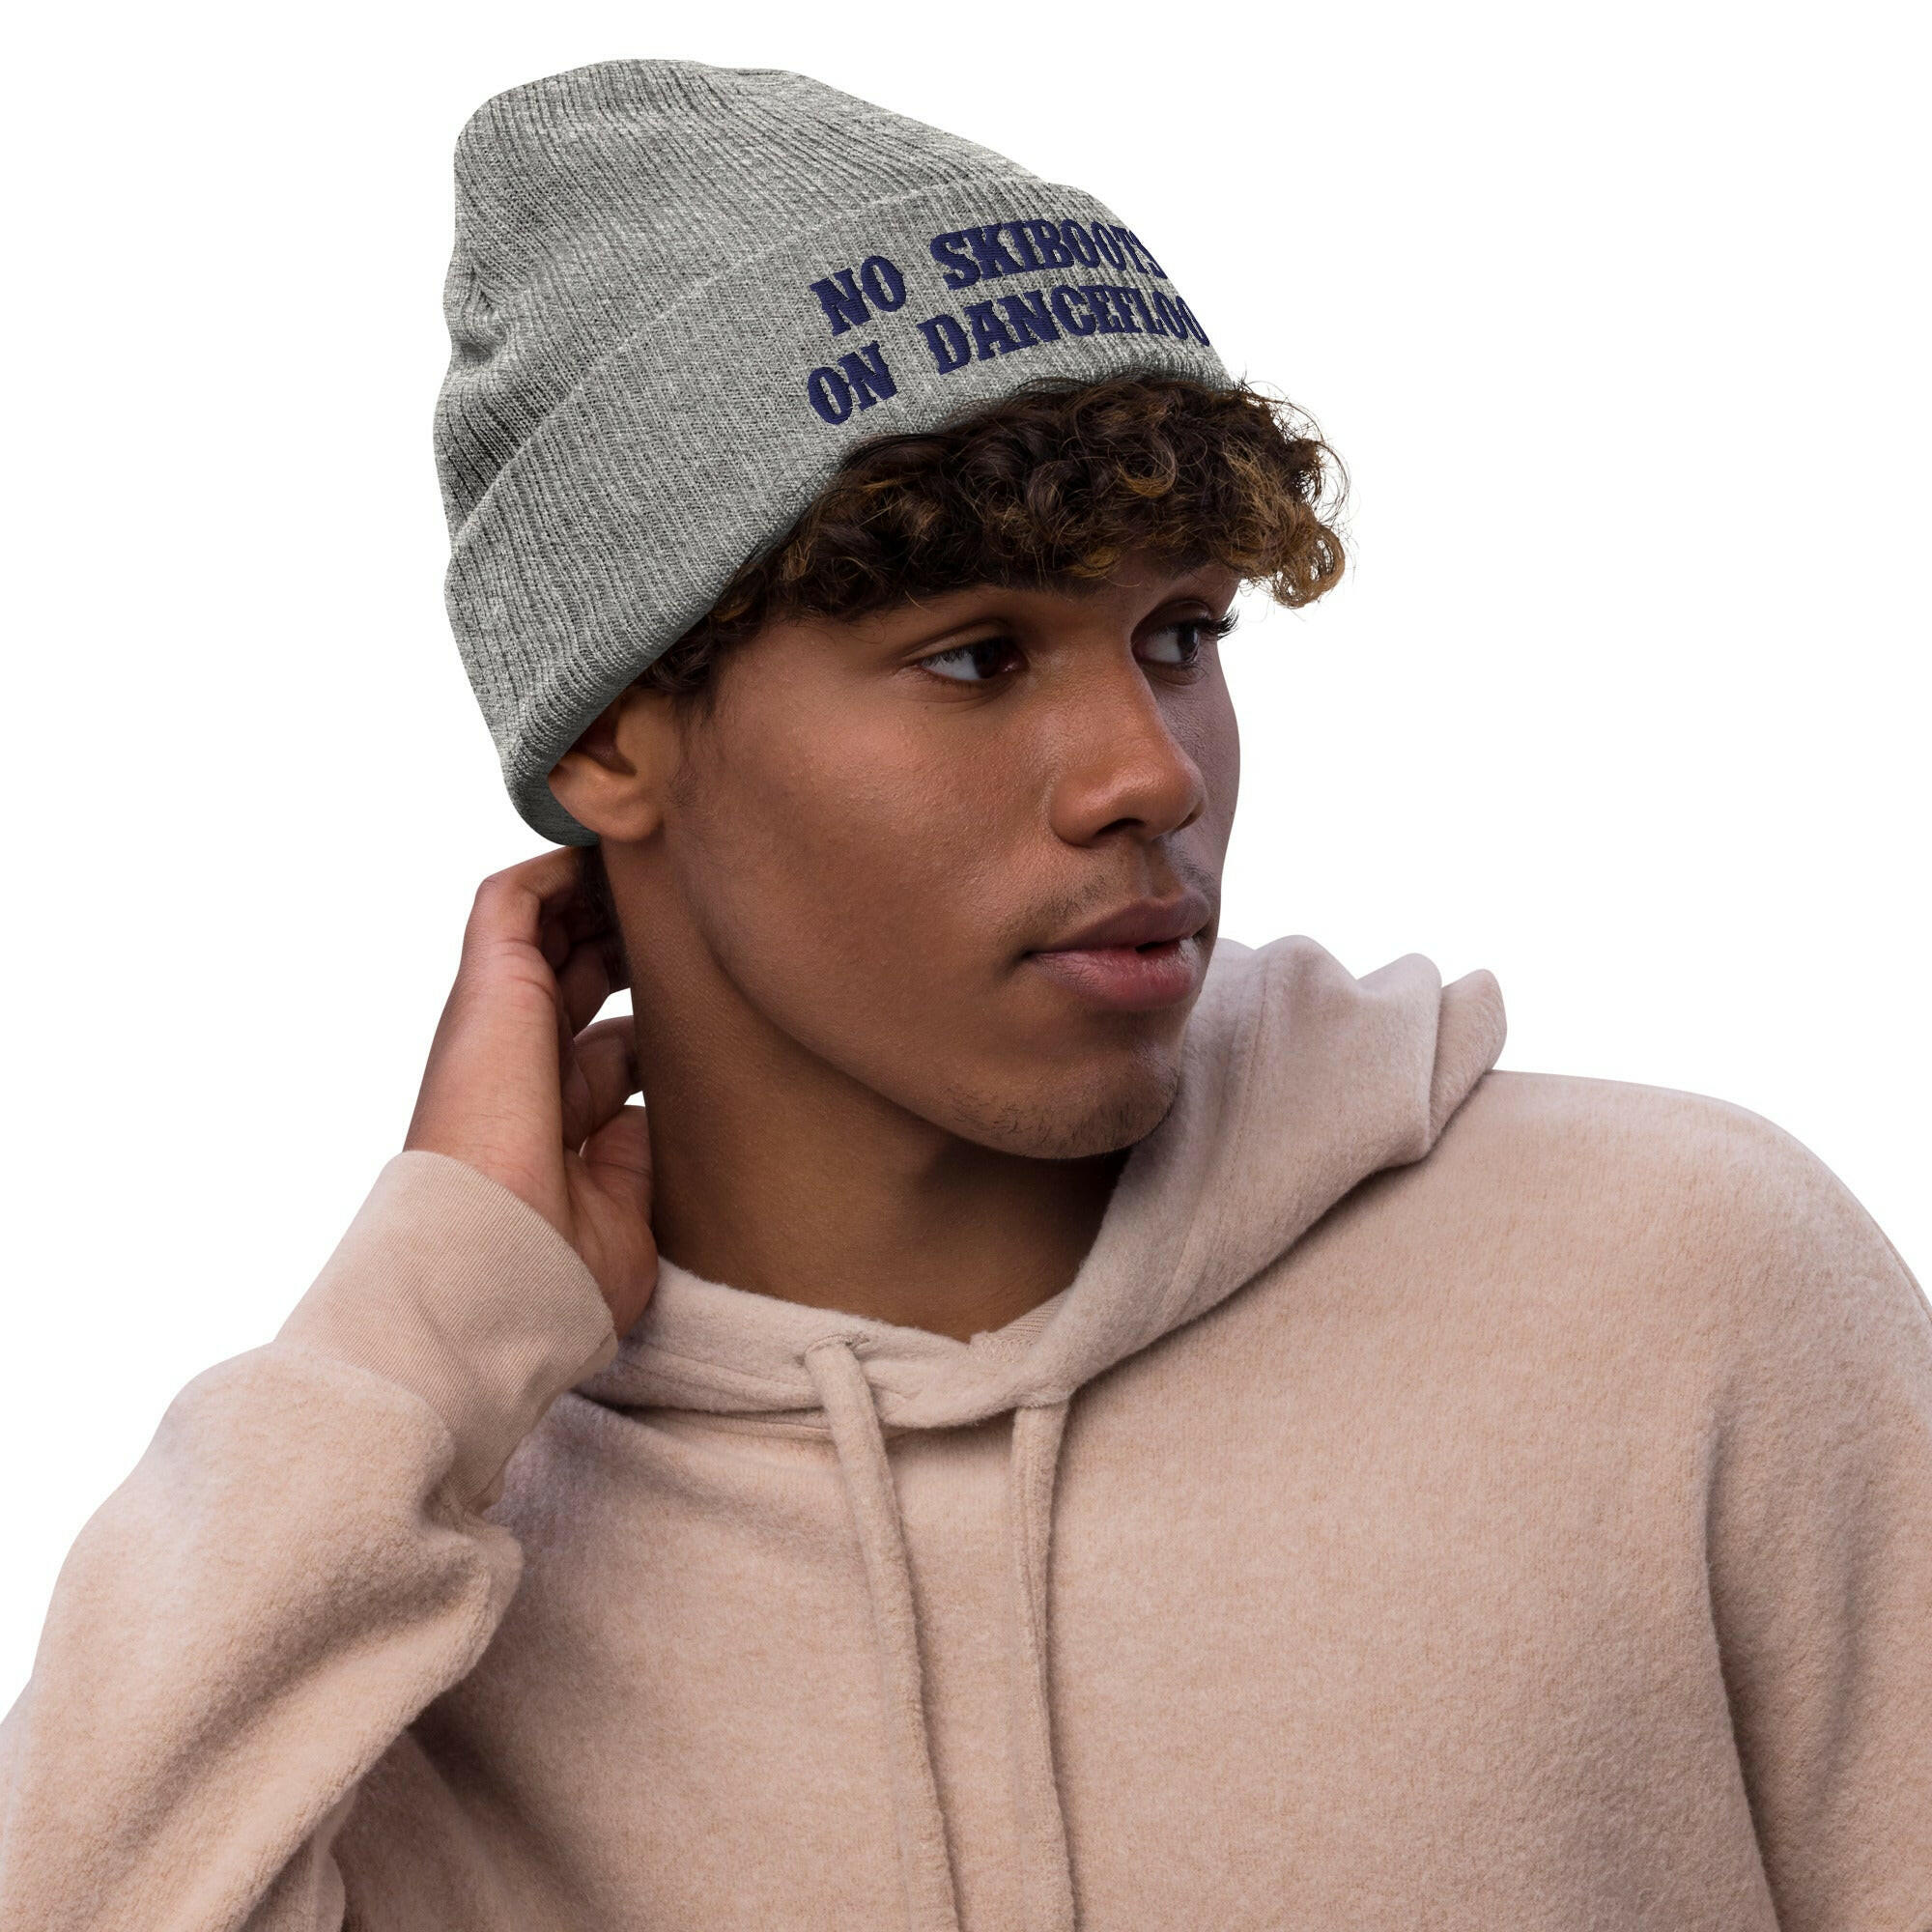 Eco ribbed knit beanie No Skiboots on Dancefloor Navy